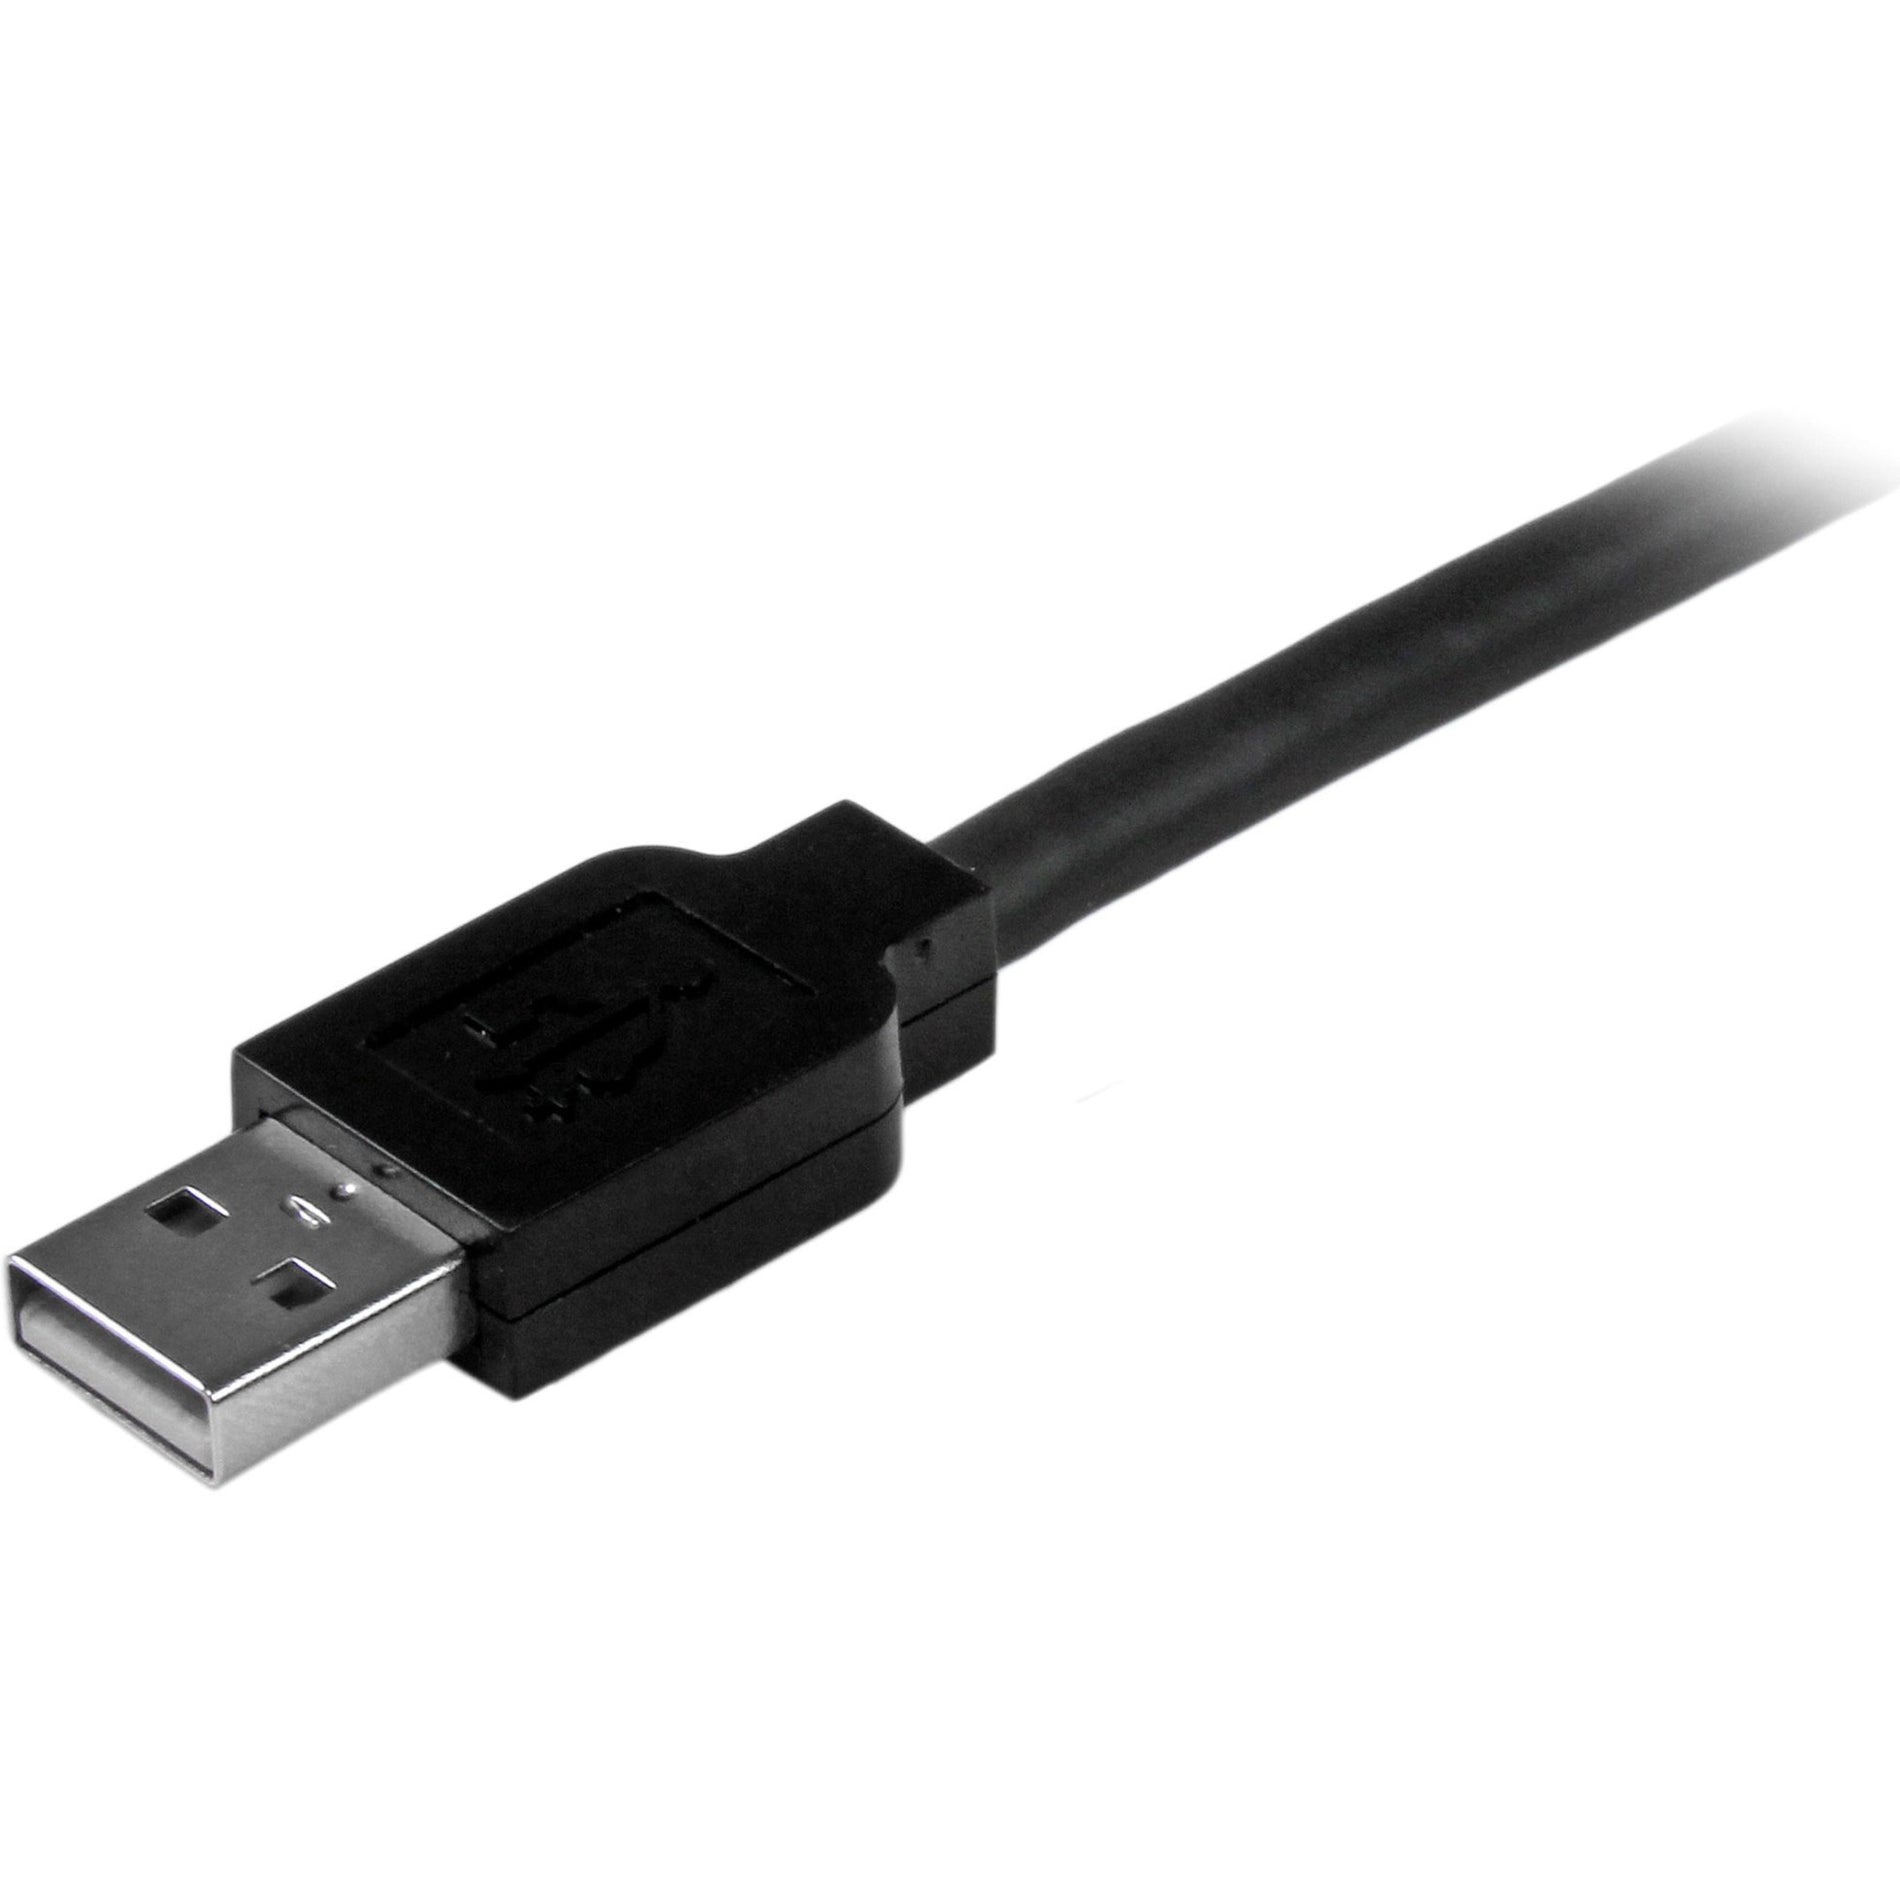 StarTech.com USB2HAB50AC 15m / 50 ft Active USB 2.0 A to B Cable - M/M, Data Transfer Cable, 480 Mbit/s, Shielded, Black